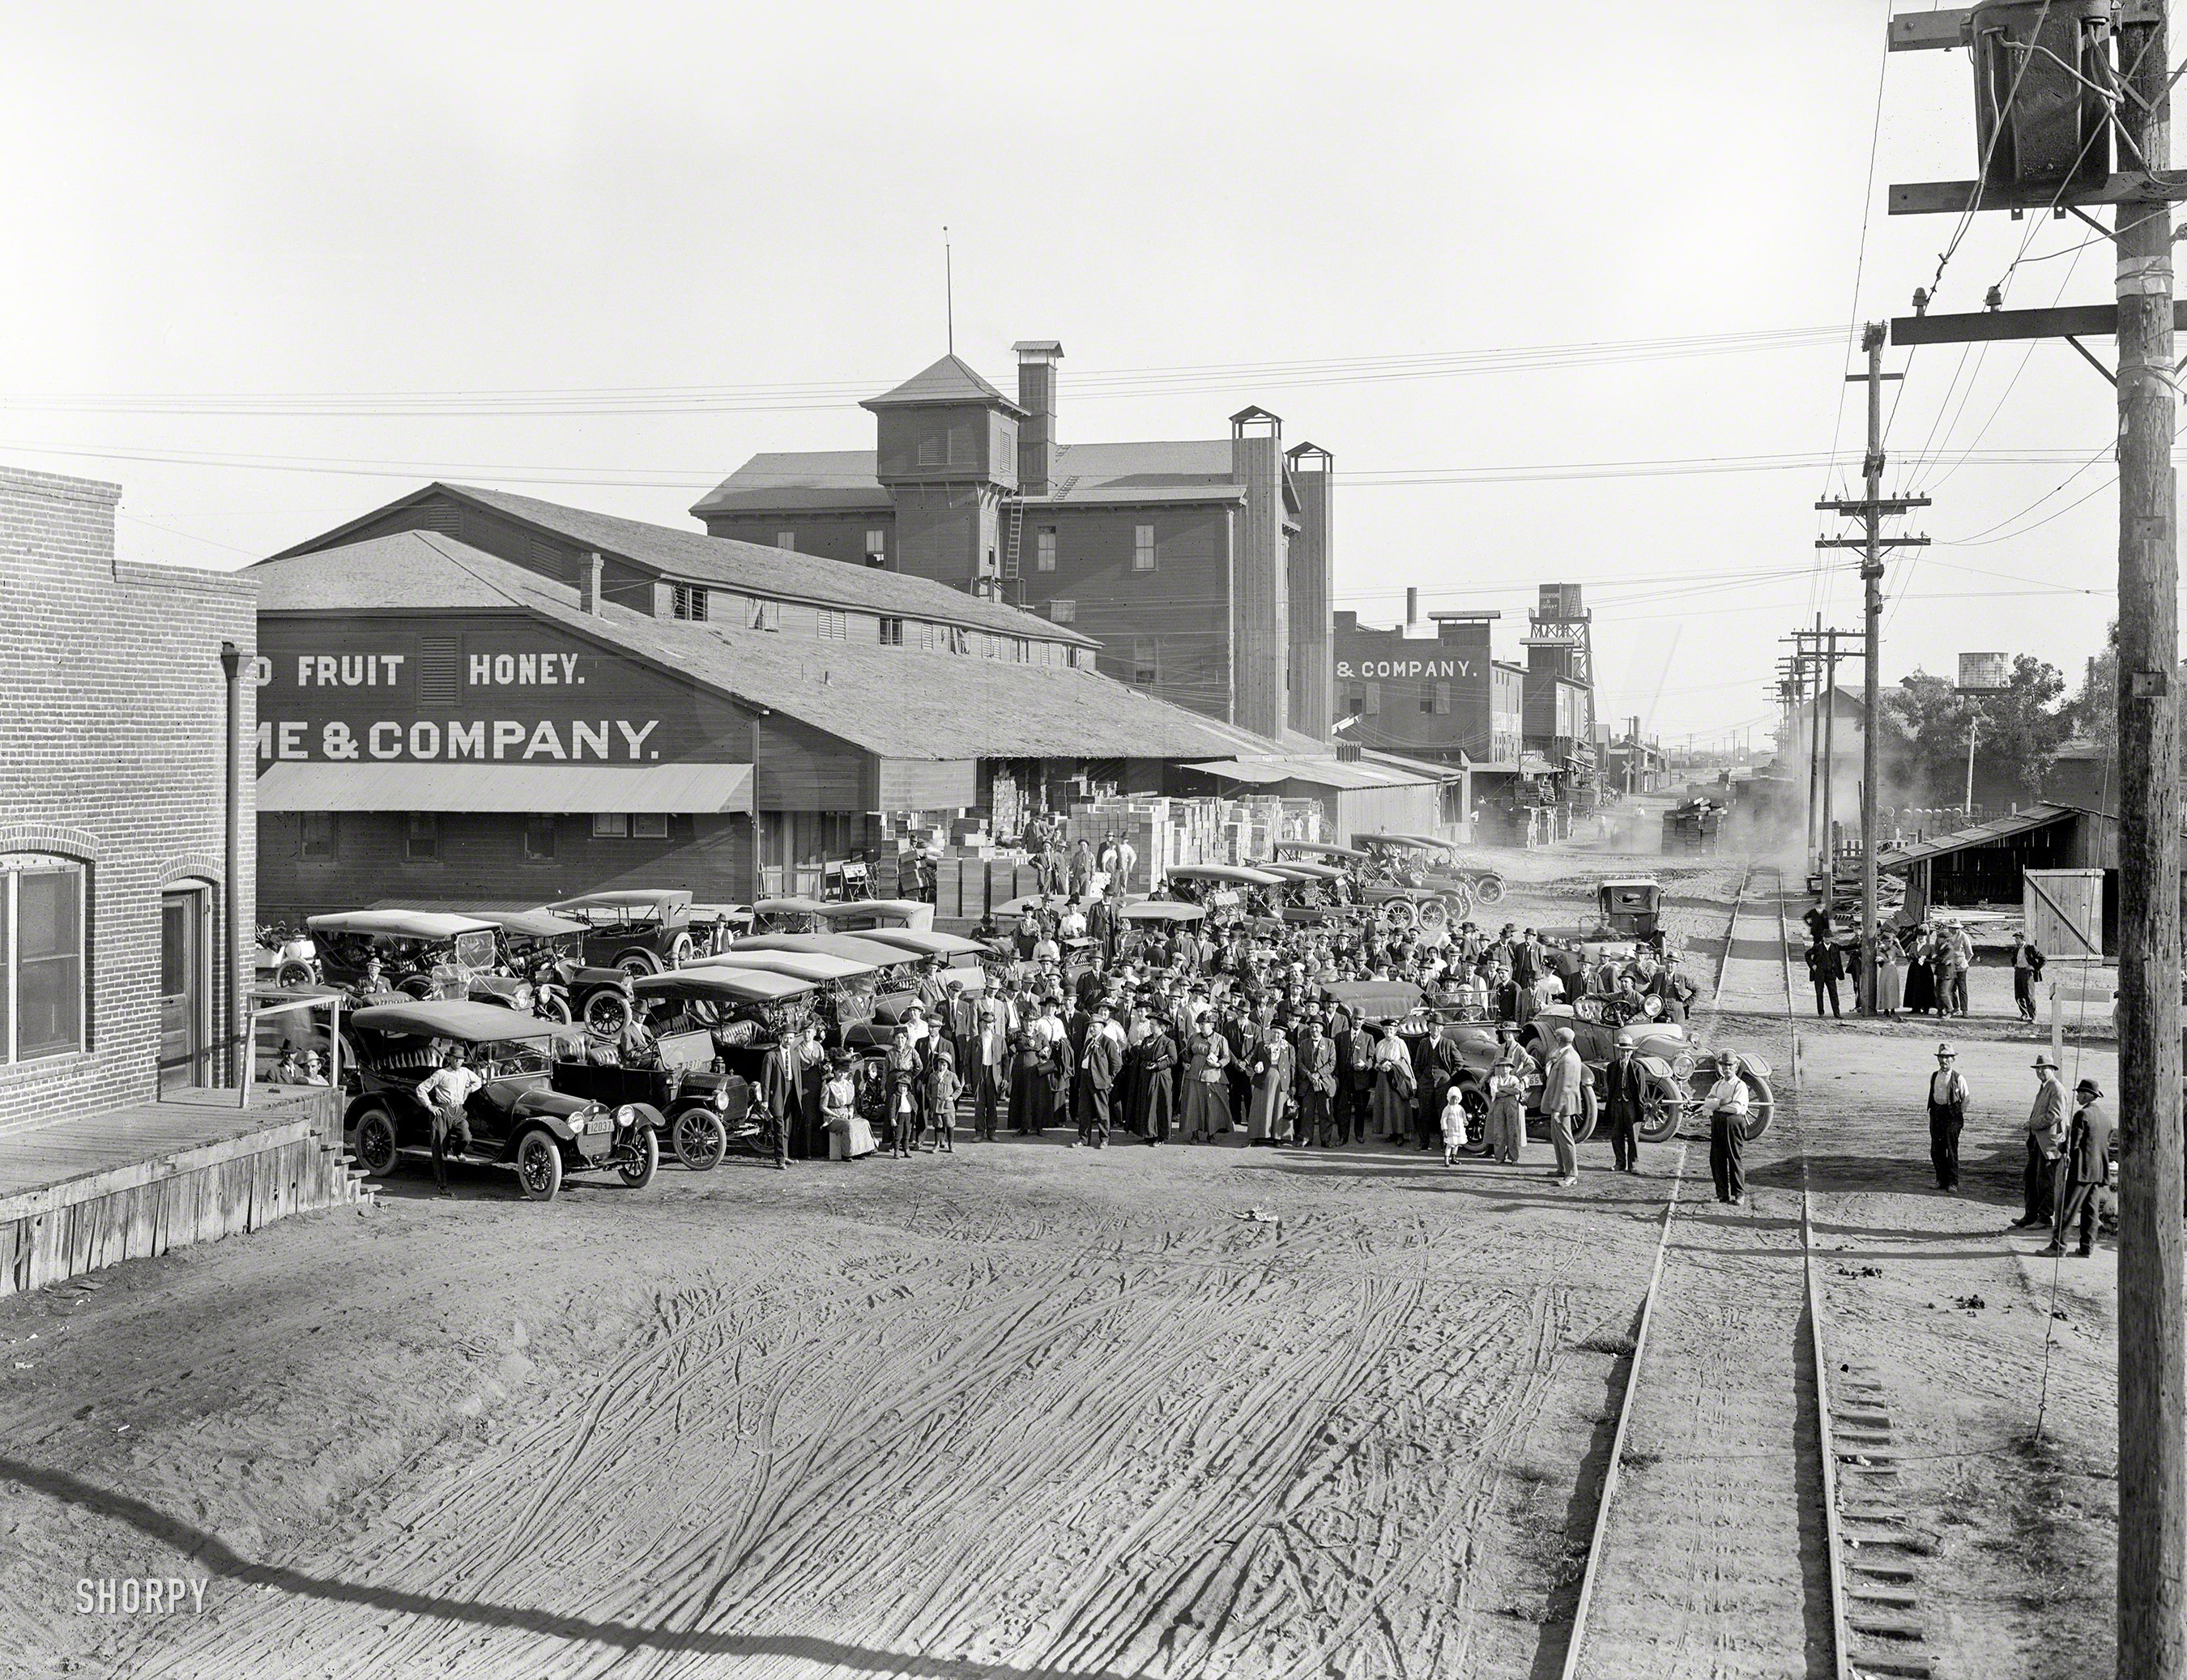 Fresno, California, circa 1915. "Auto tourists in Fruit Packing District." 8x6 glass negative by Howard Clinton Tibbitts, a San Francisco-based photographer who worked for the Southern Pacific railroad and its Sunset magazine. View full size.